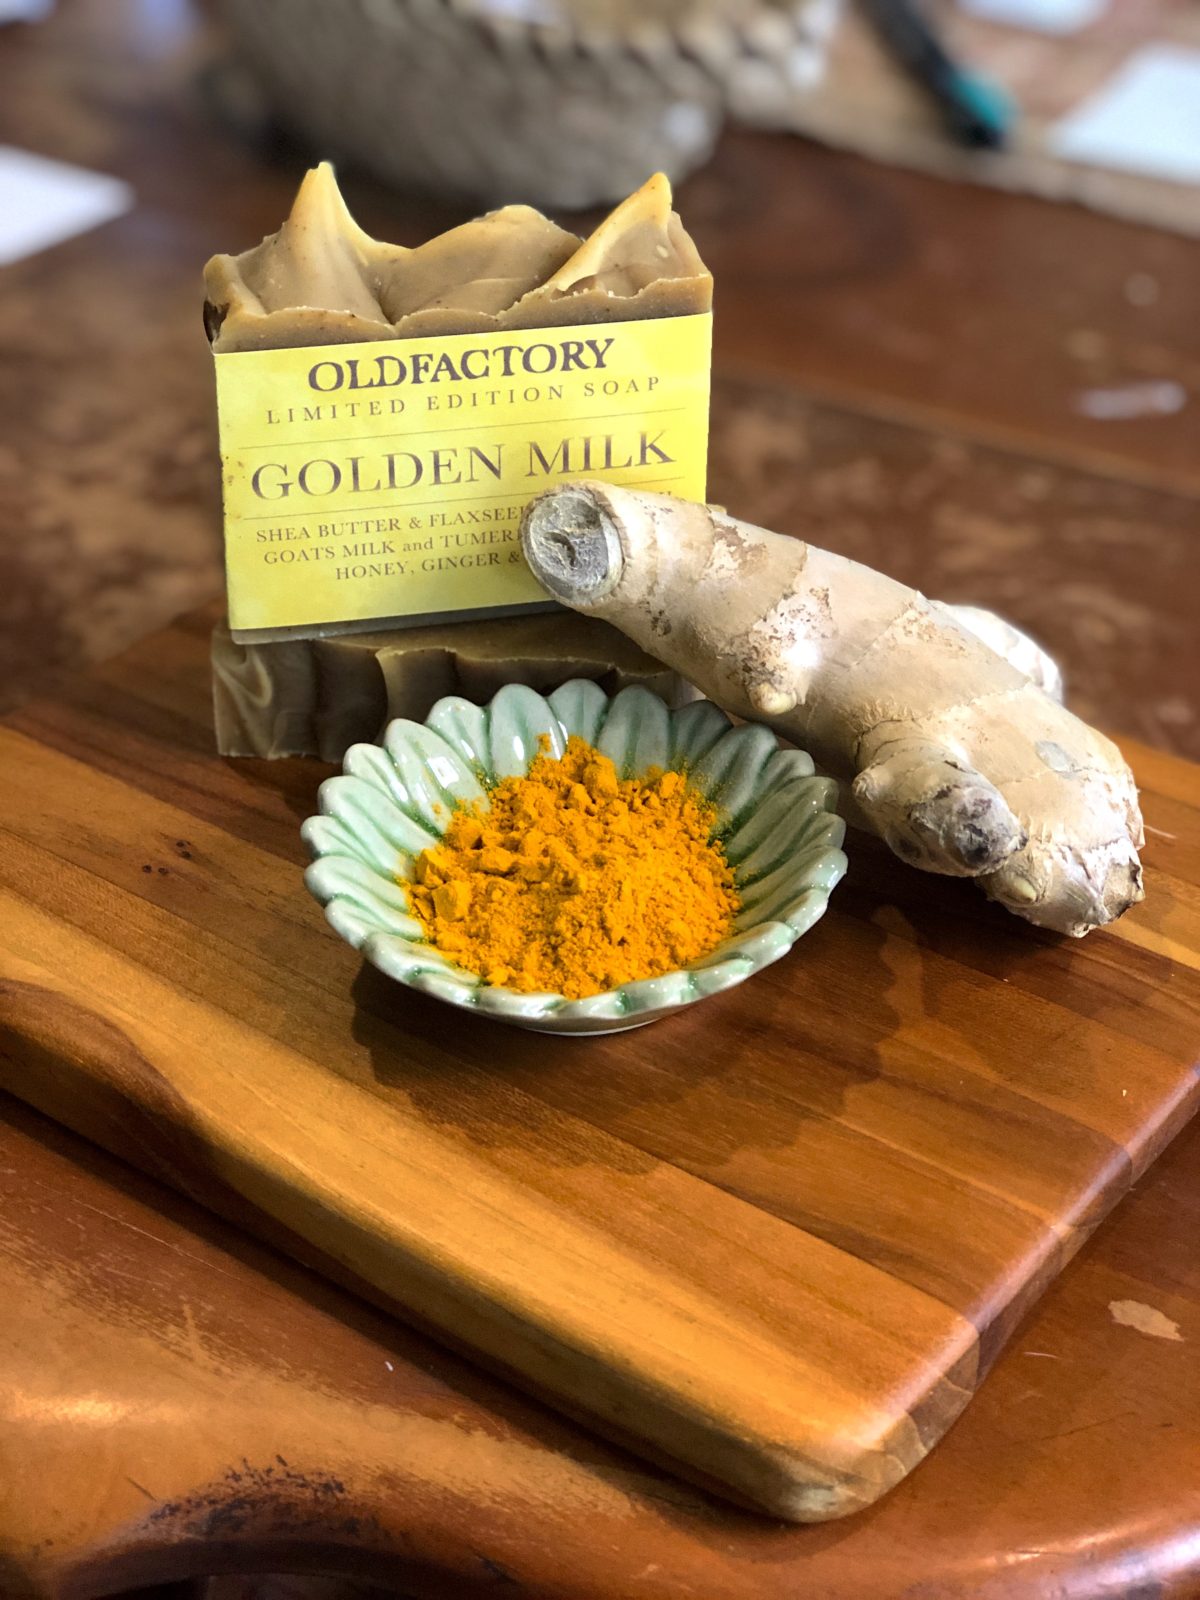 Golden Milk Turmeric Goats Milk Soap Limited Edition Old Factory